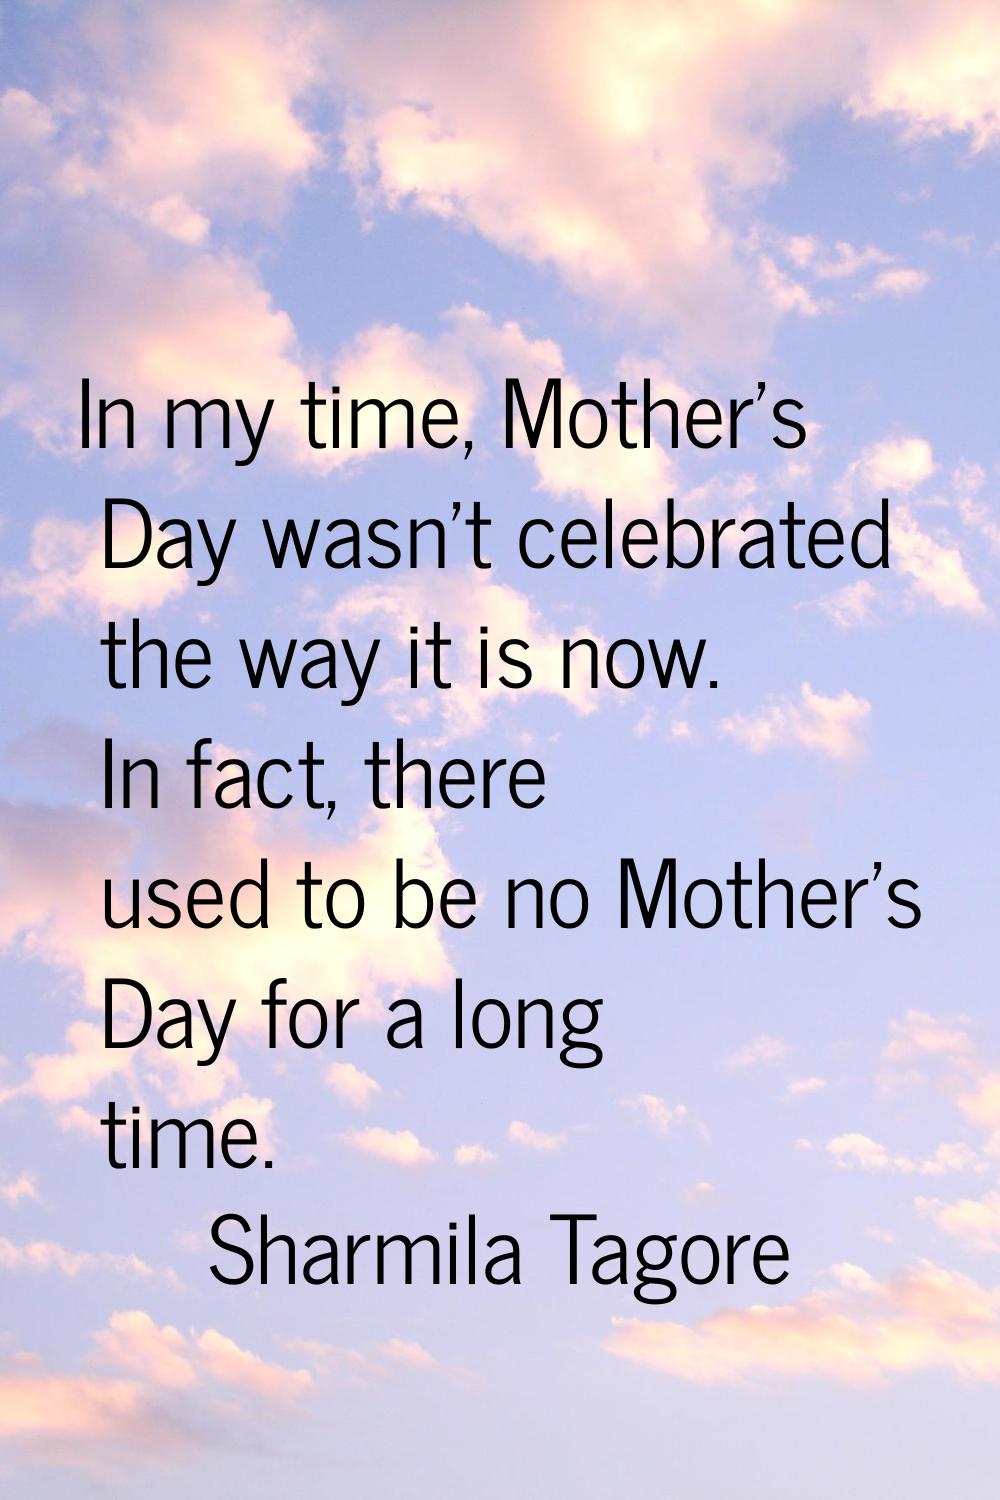 In my time, Mother's Day wasn't celebrated the way it is now. In fact, there used to be no Mother's